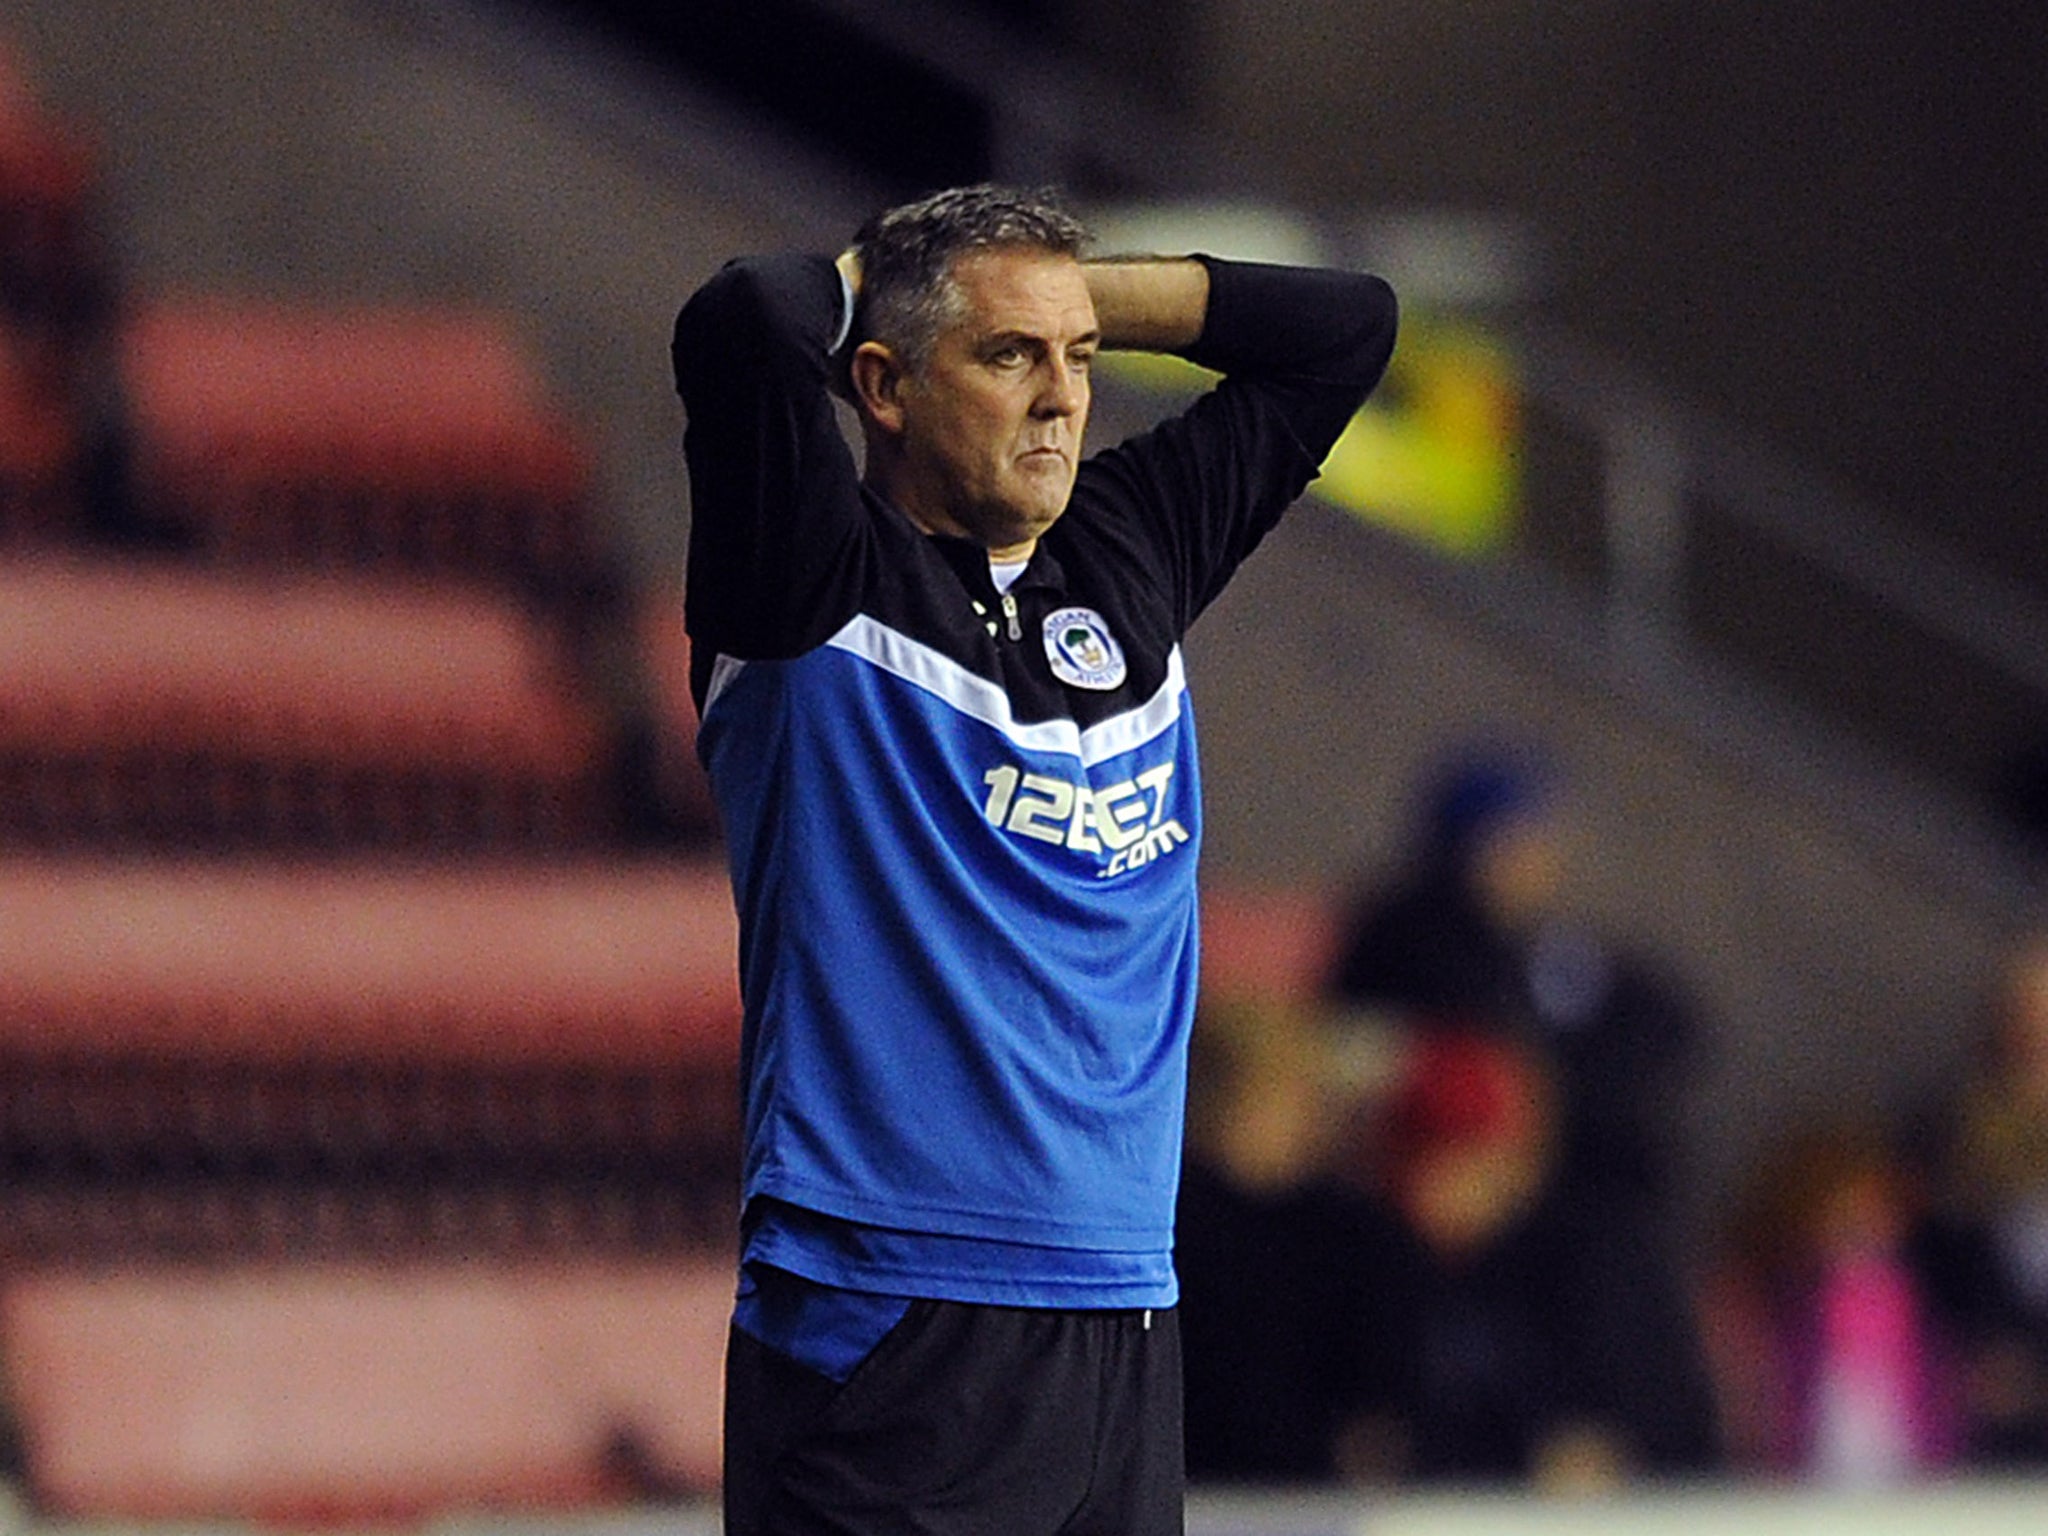 Owen Coyle has left Wigan Athletic by mutual agreement